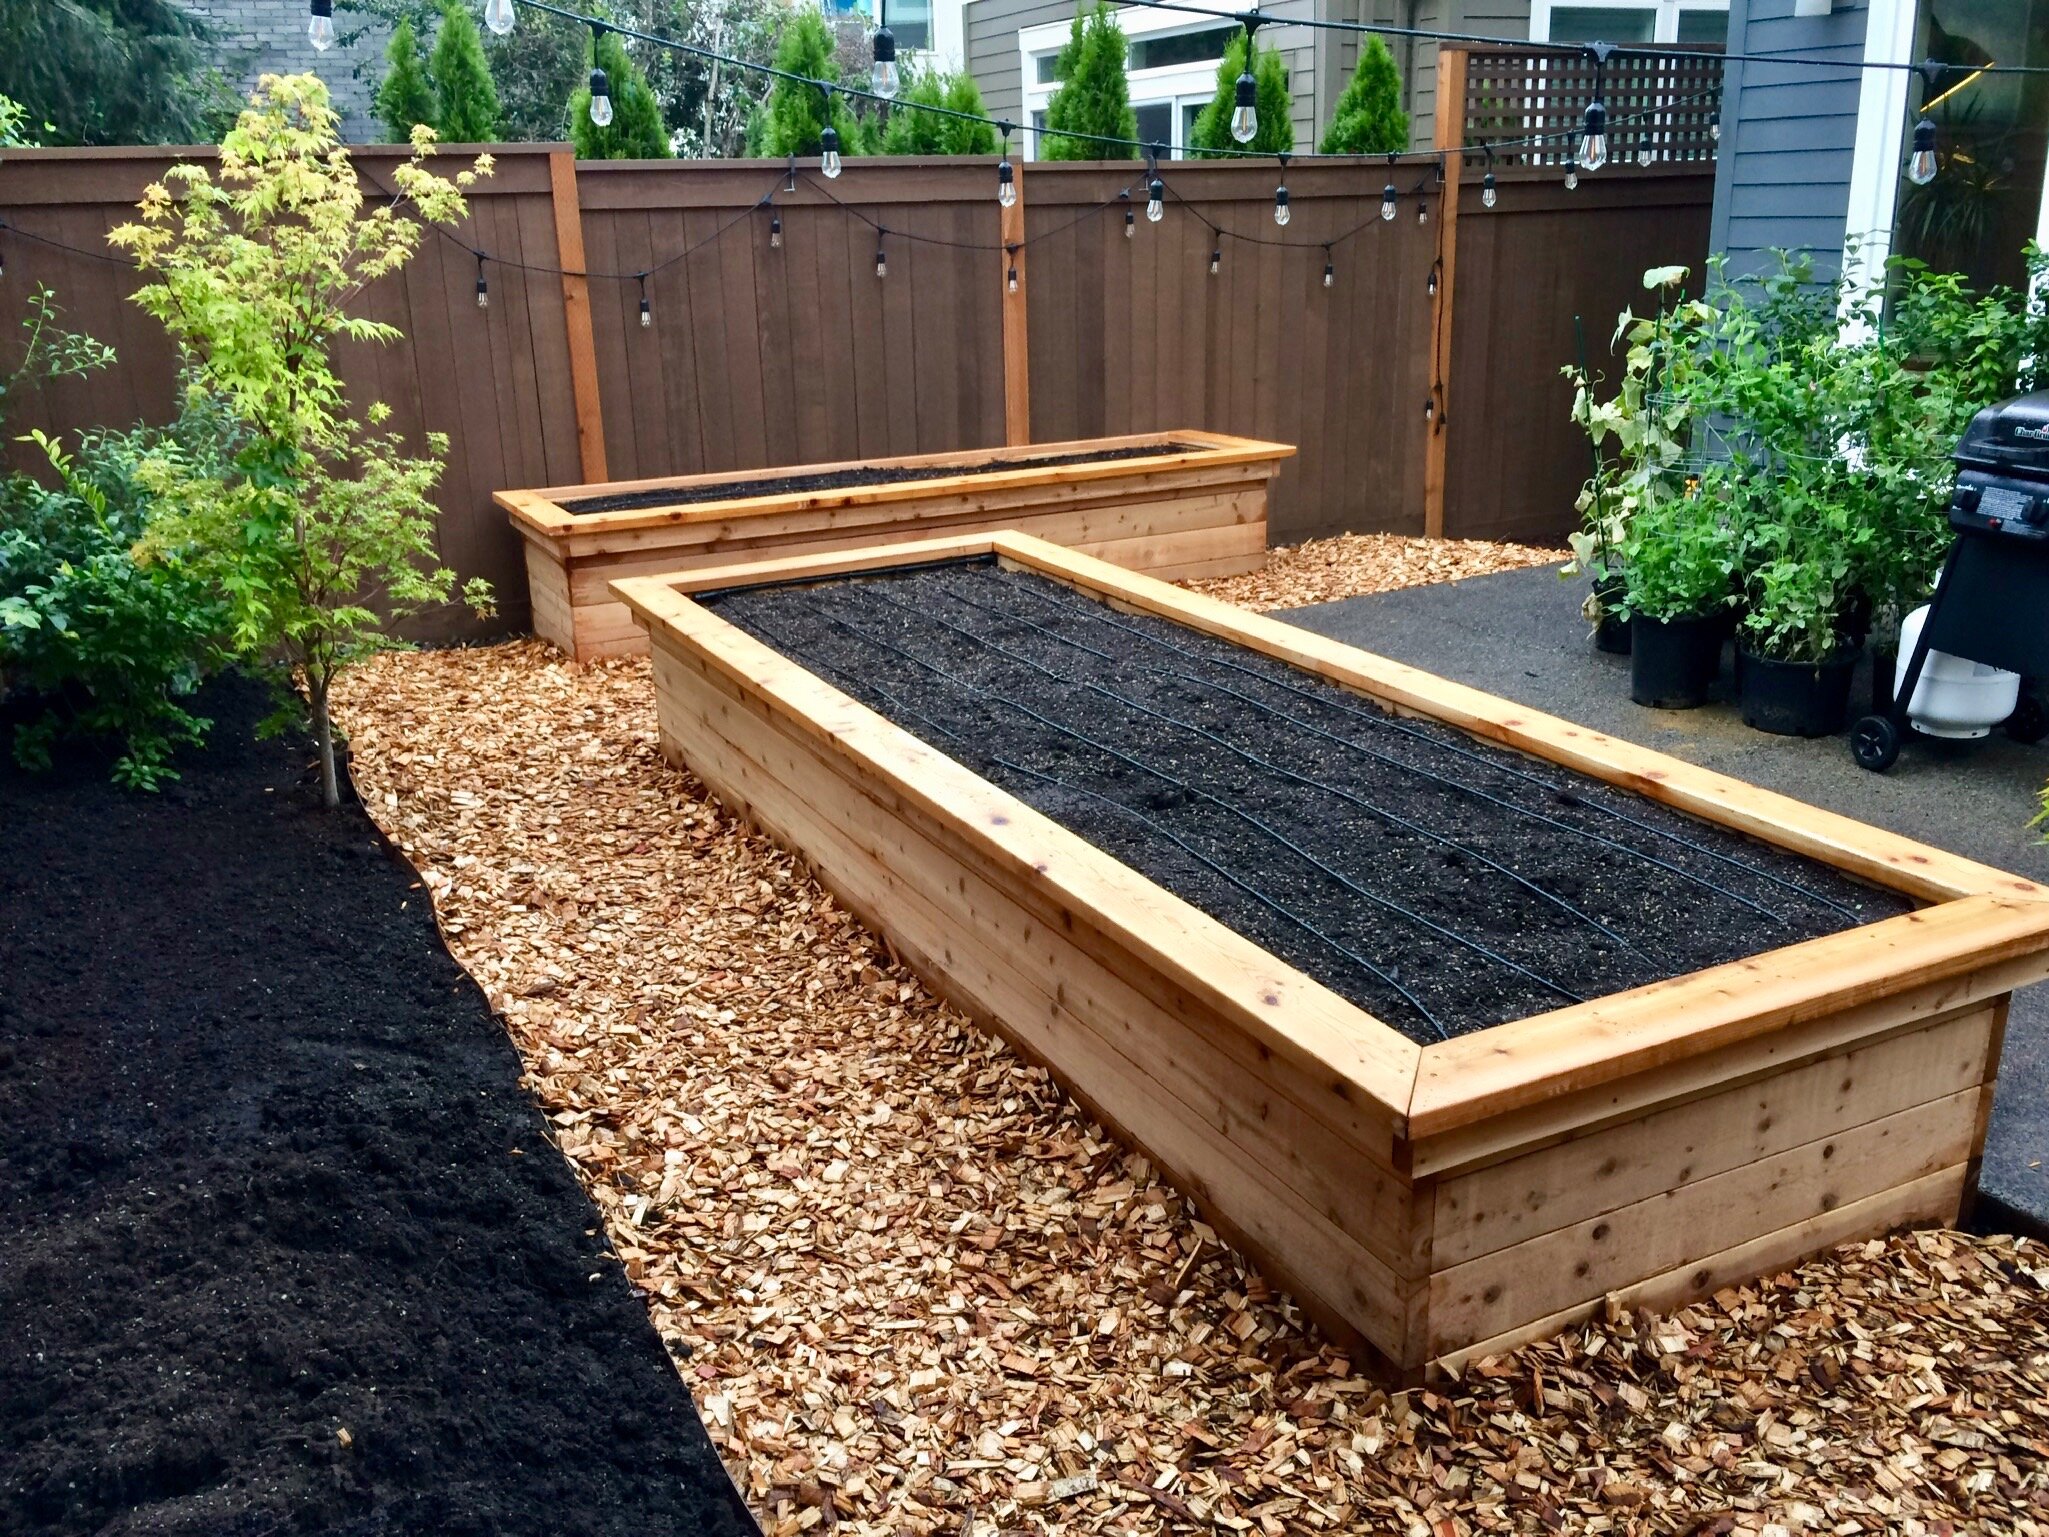  Cedar Raised Beds with benches 